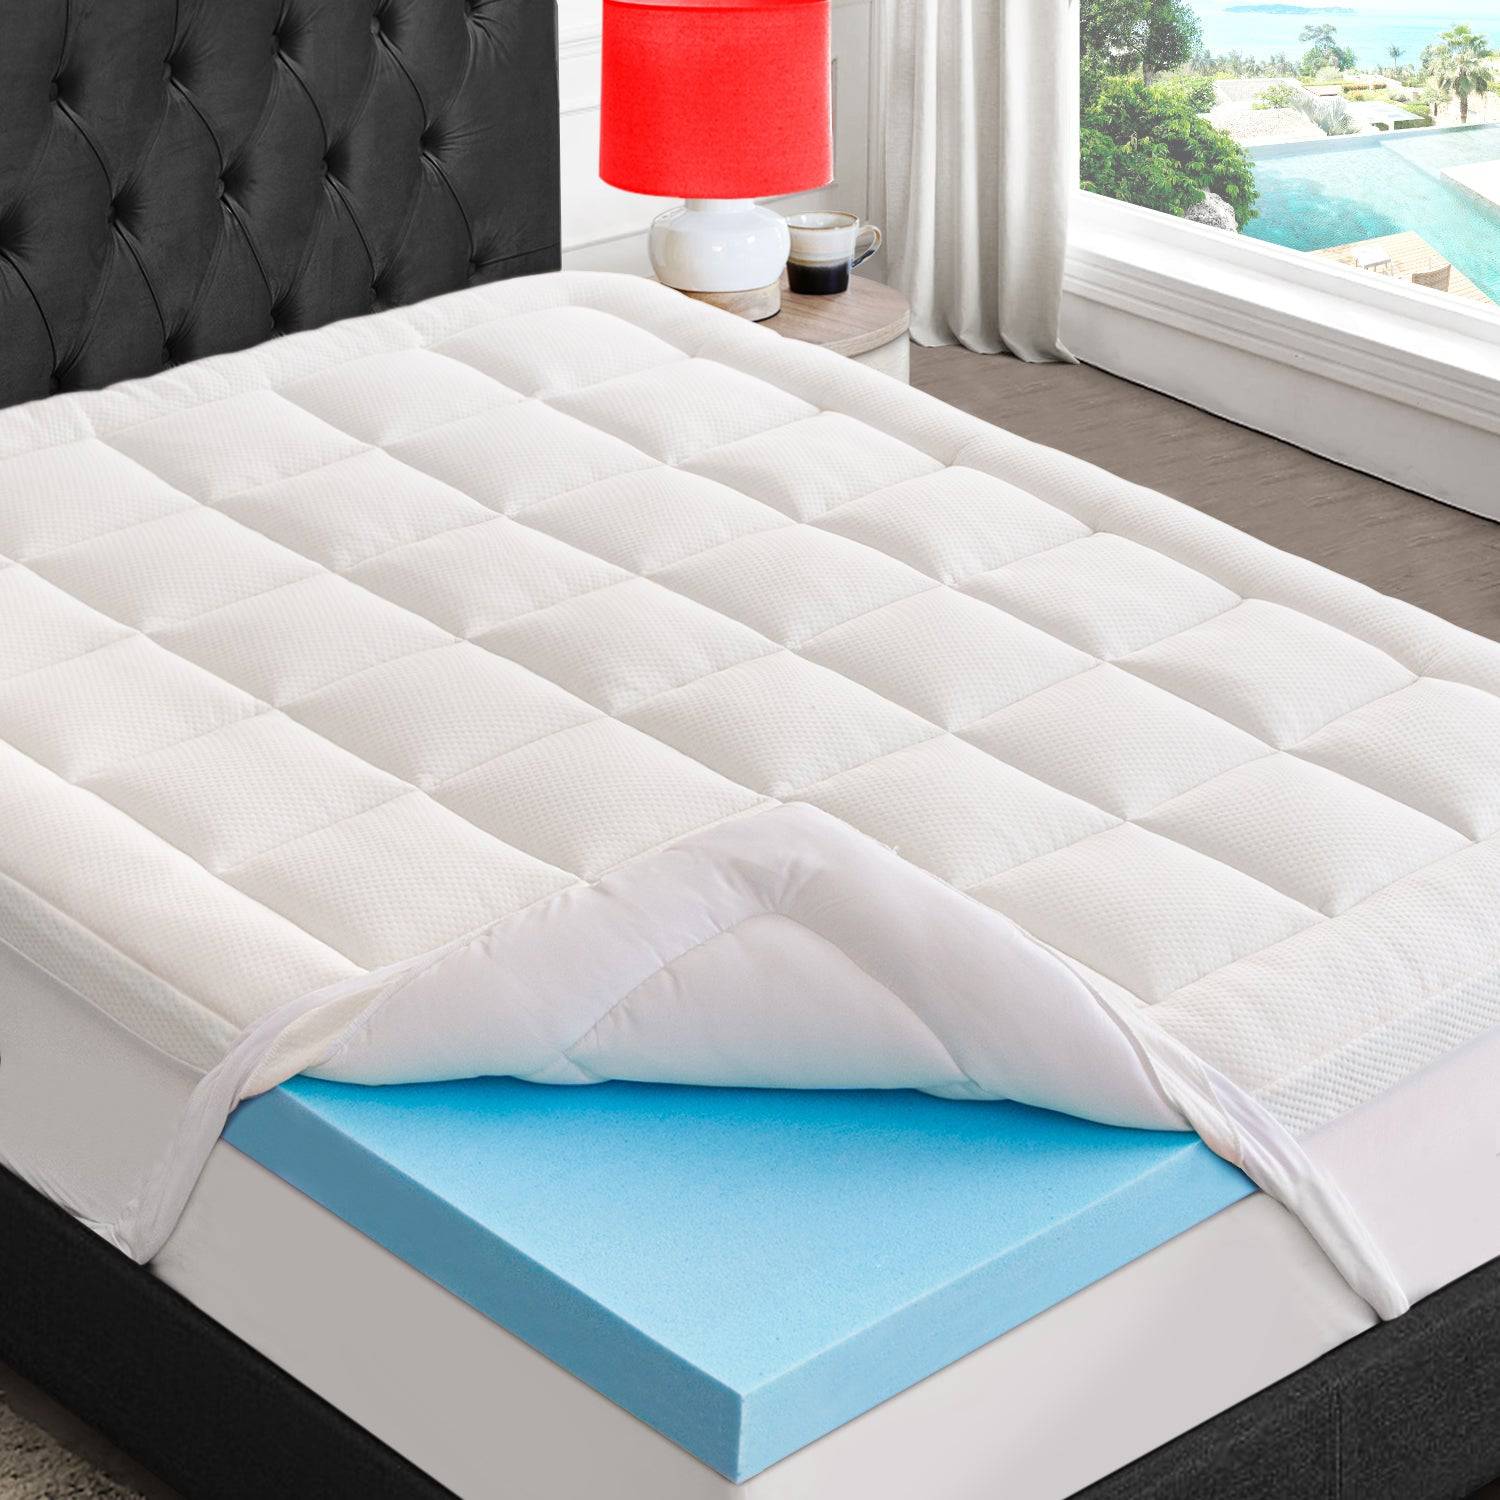 3 inch dual layer gel memory foam mattress topper plush cooling bamboo pillow top cover comfort support mattress pad with deep pocket back pain relief